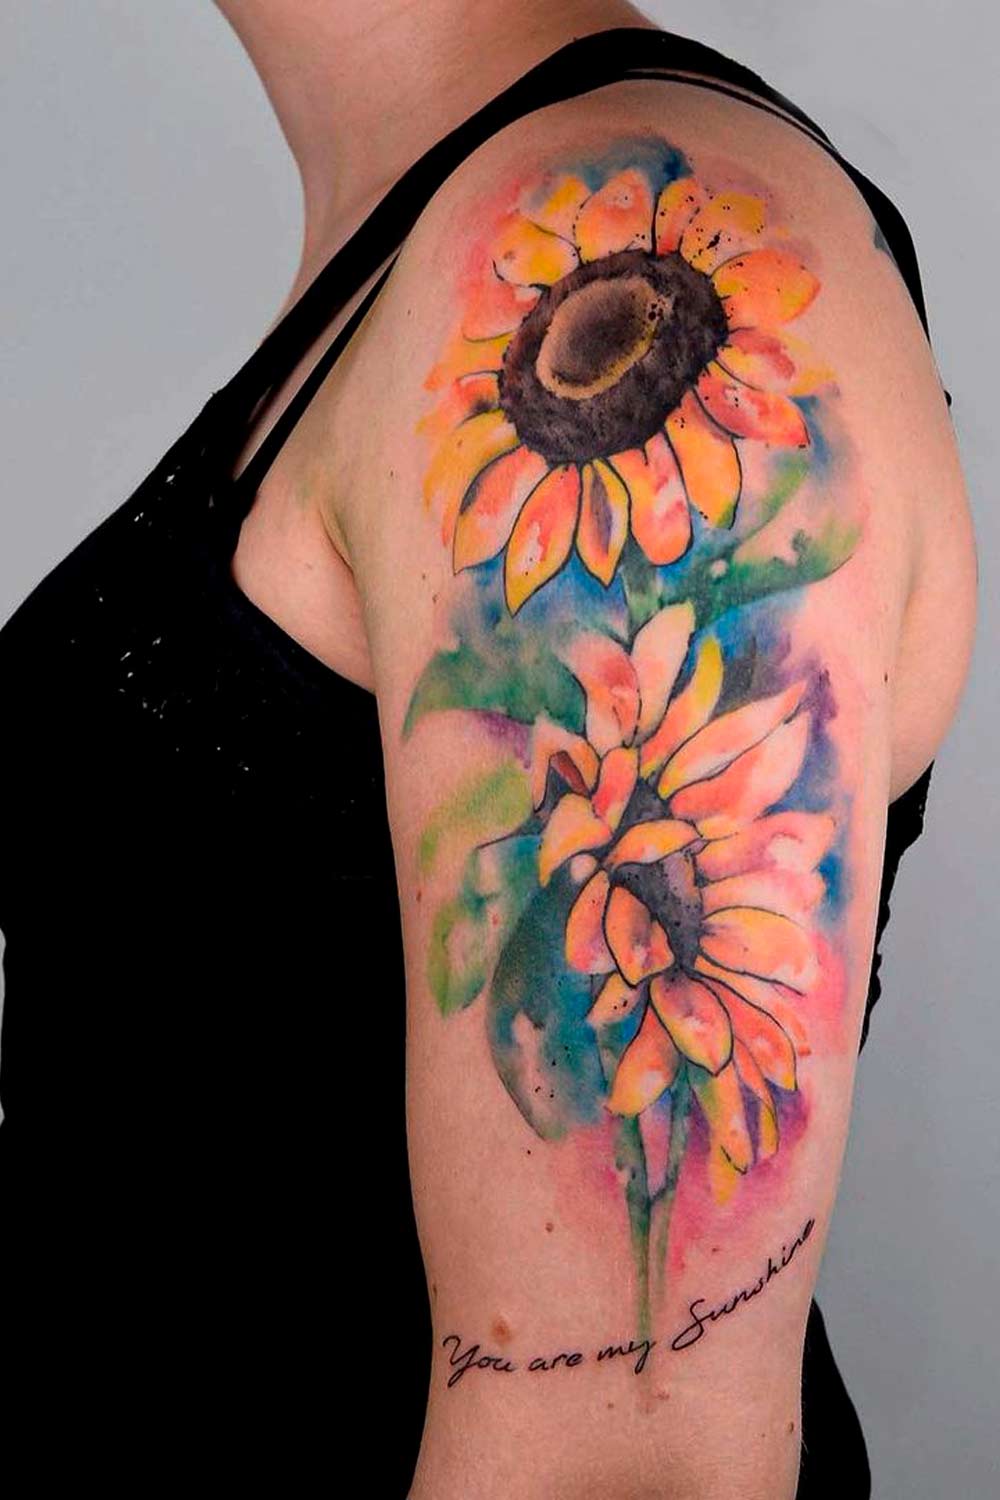 Sunflower Arm Tattoo Design With Lettering